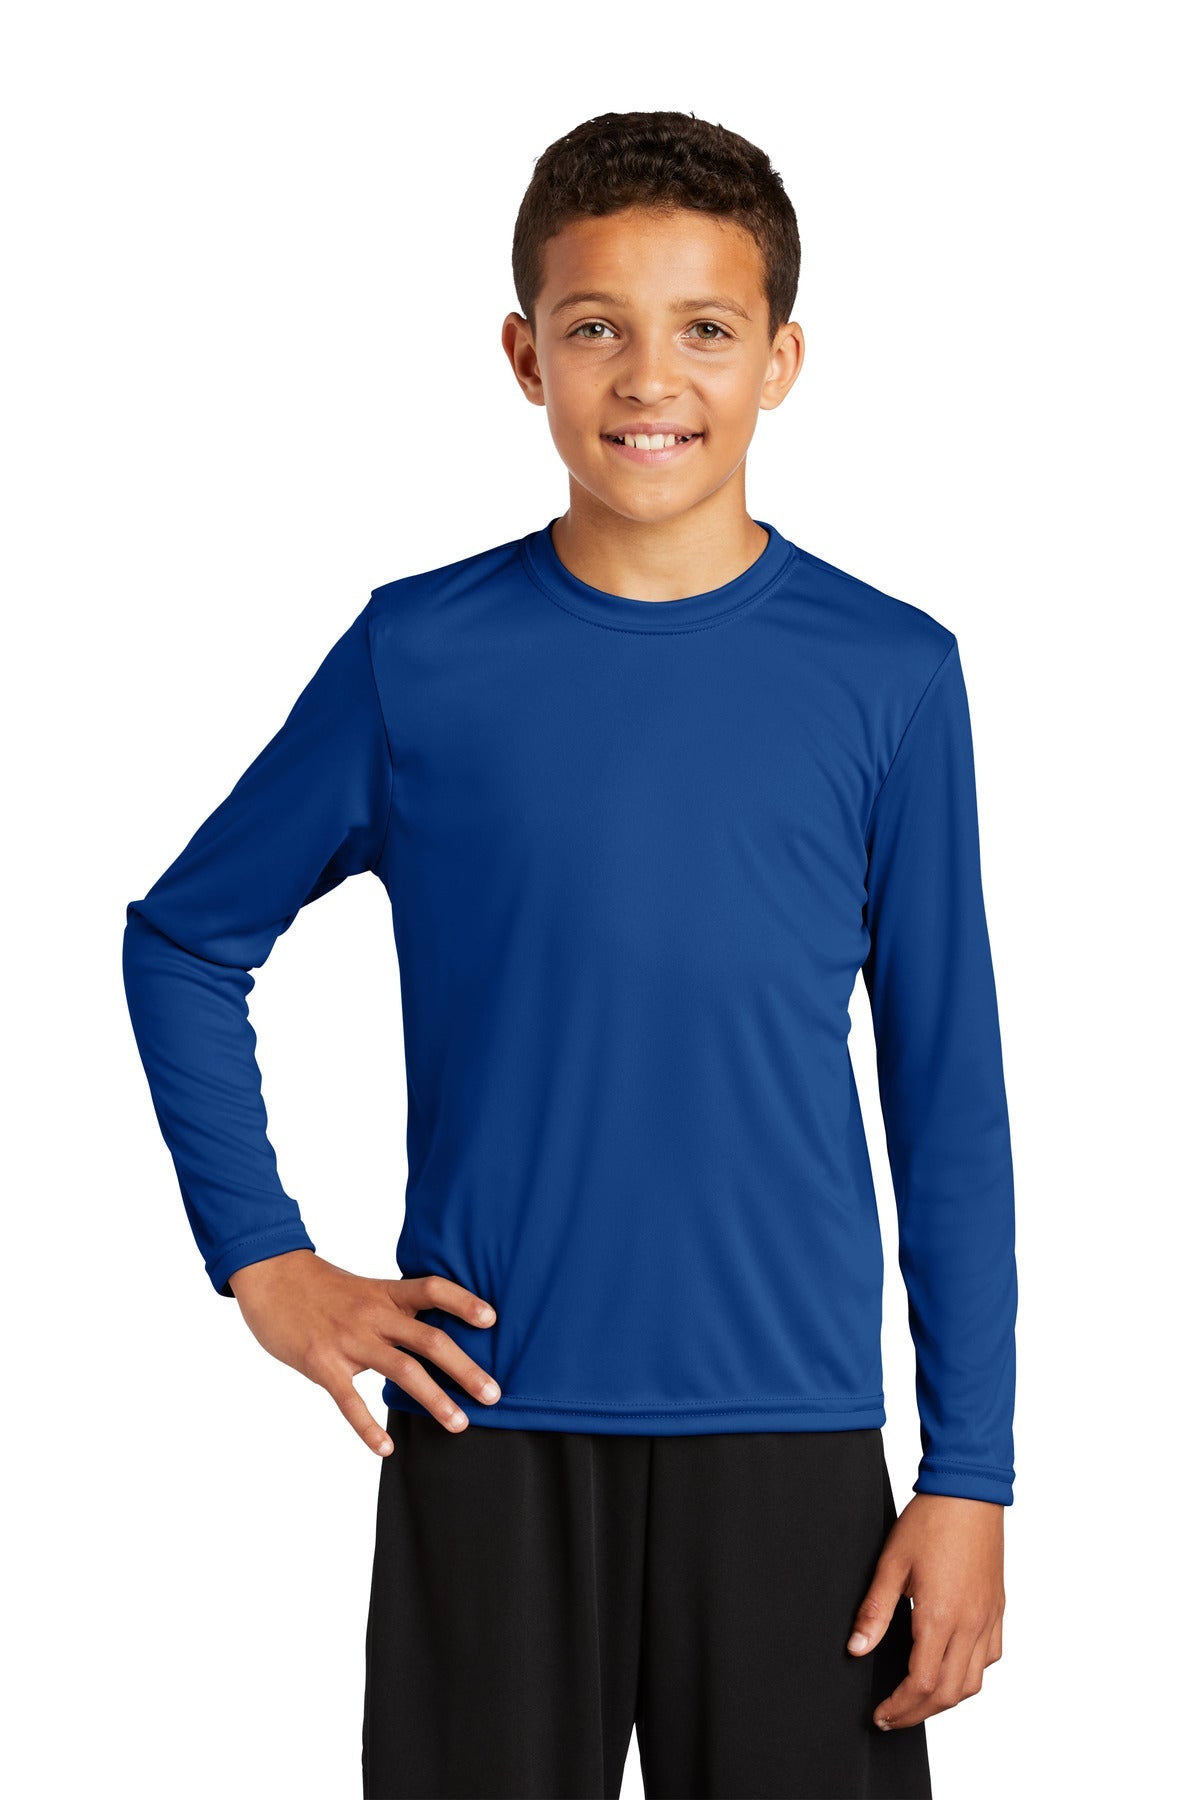 Sport-Tek® Youth Long Sleeve PosiCharge® Competitor™ Tee. YST350LS [True Royal] - DFW Impression